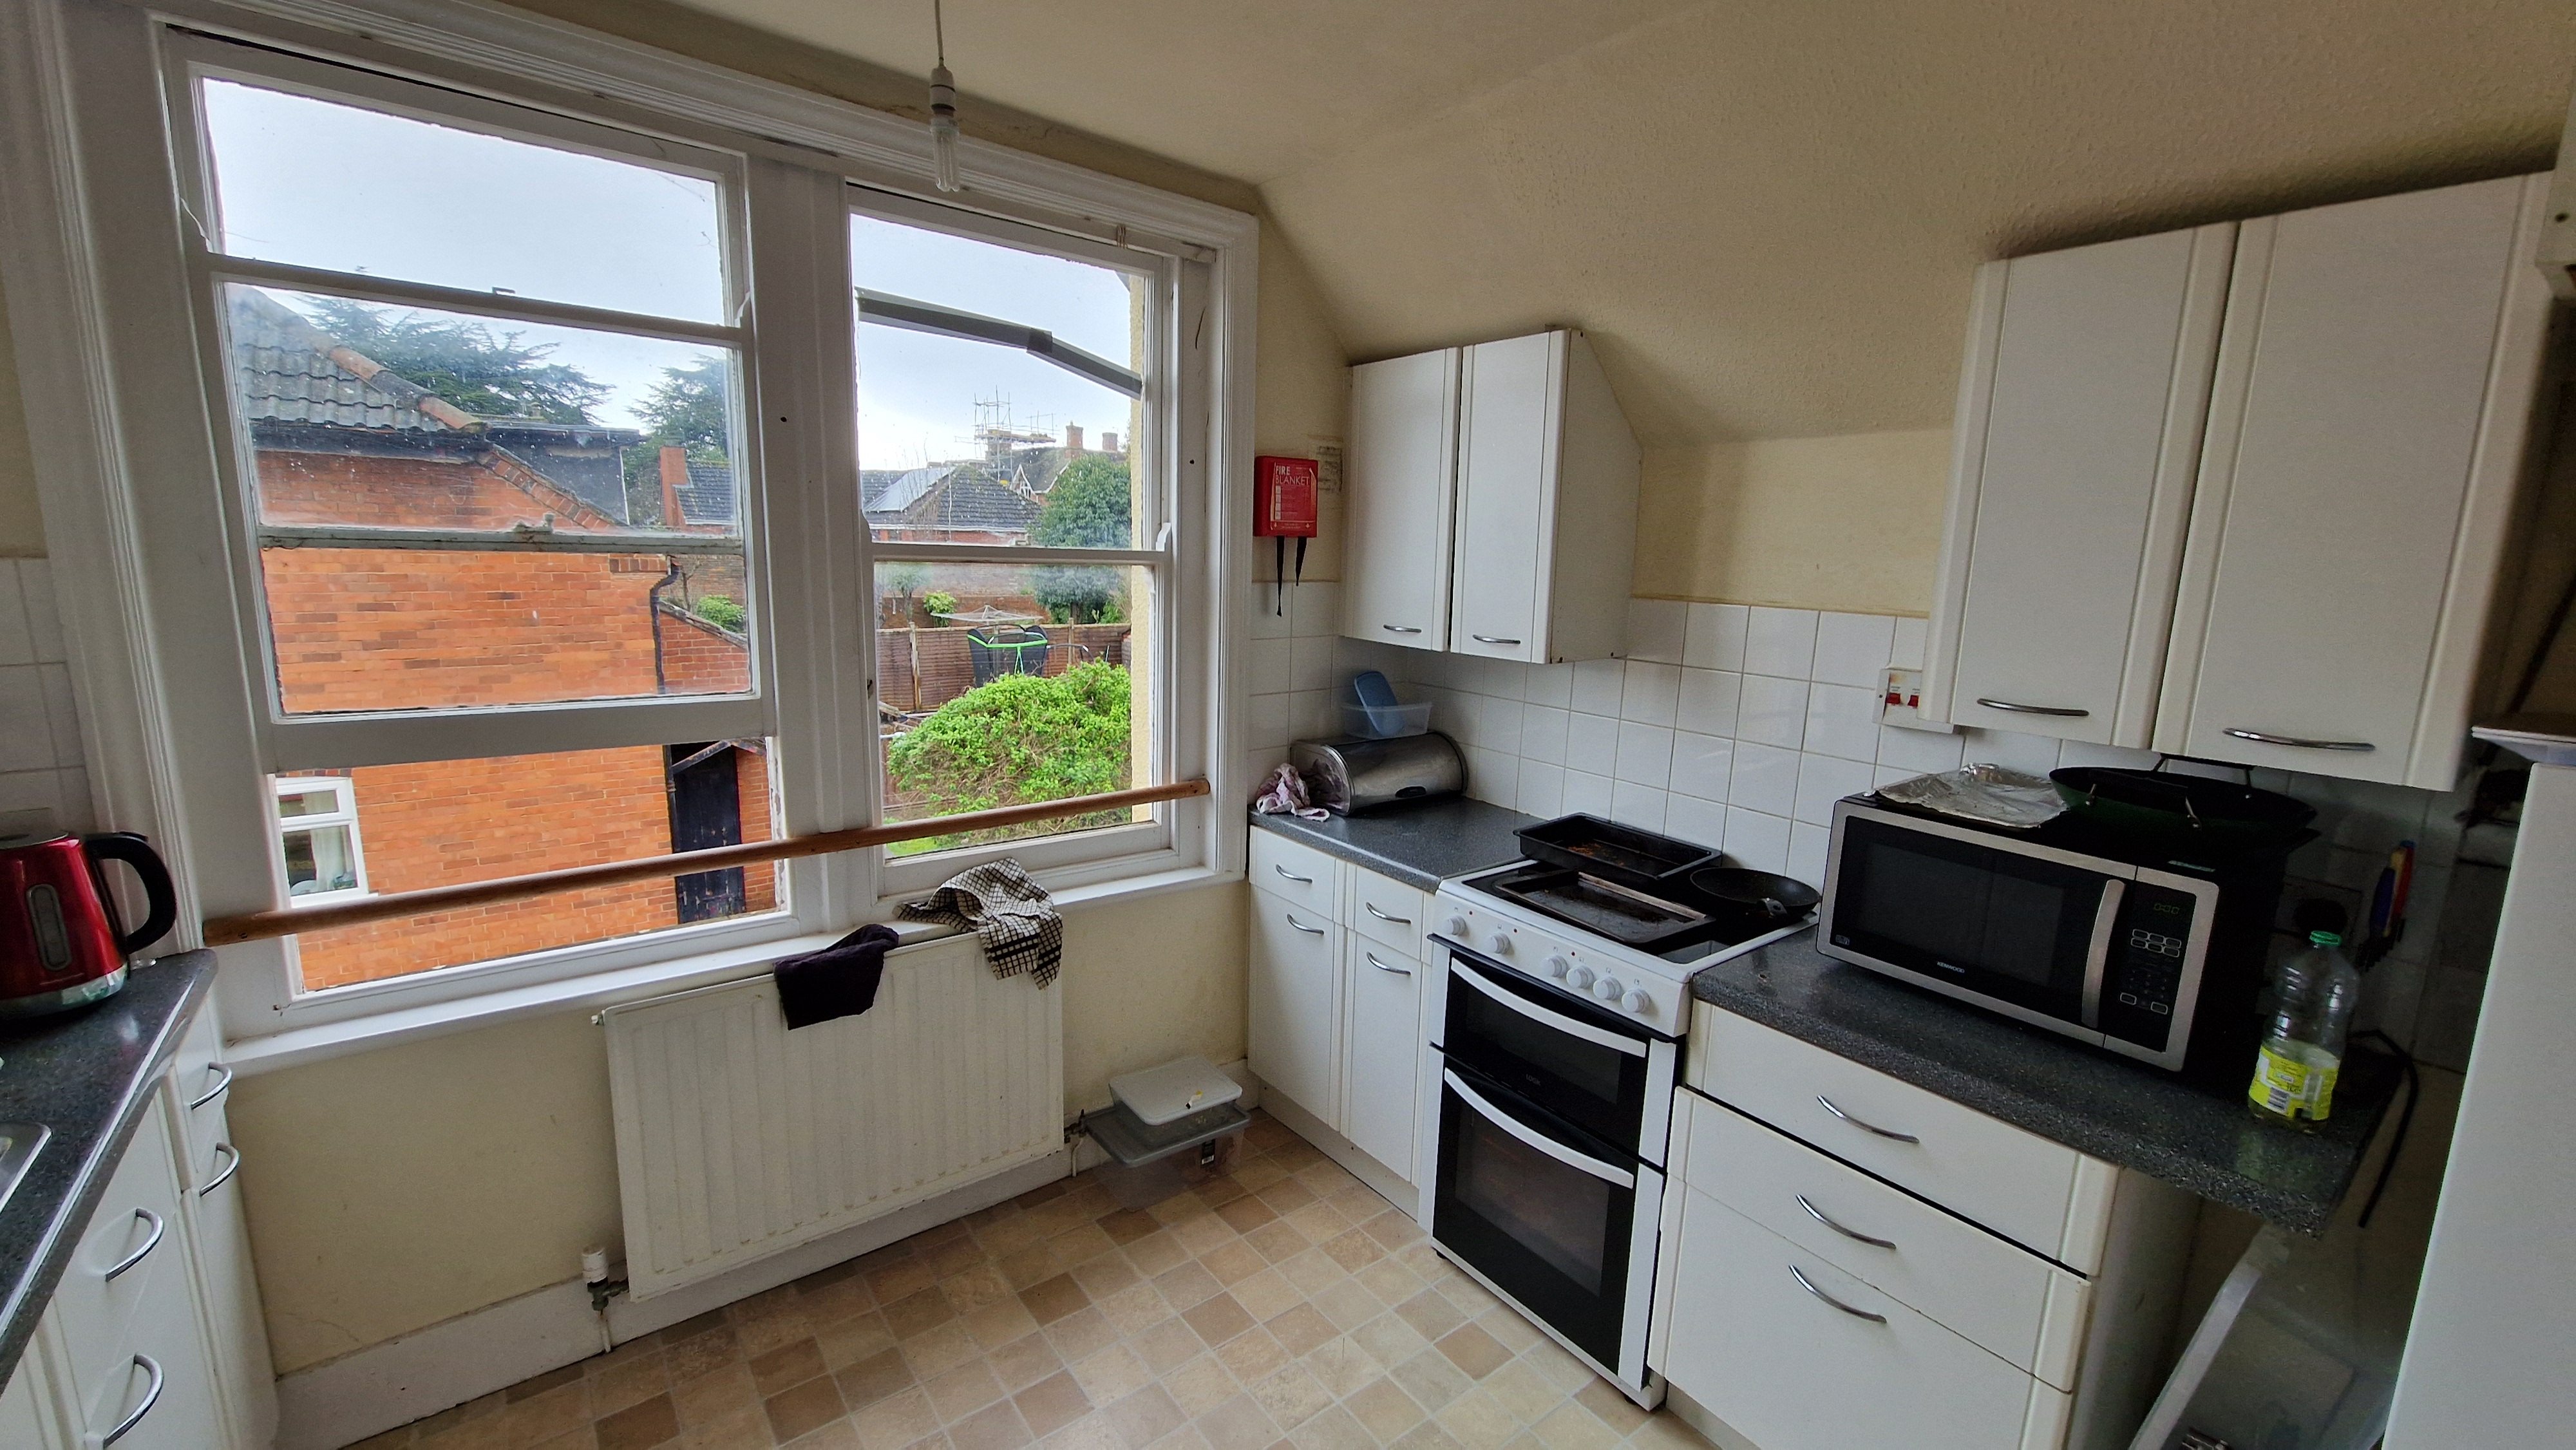 1 bed house / flat share to rent in Belvedere Road  - Property Image 3